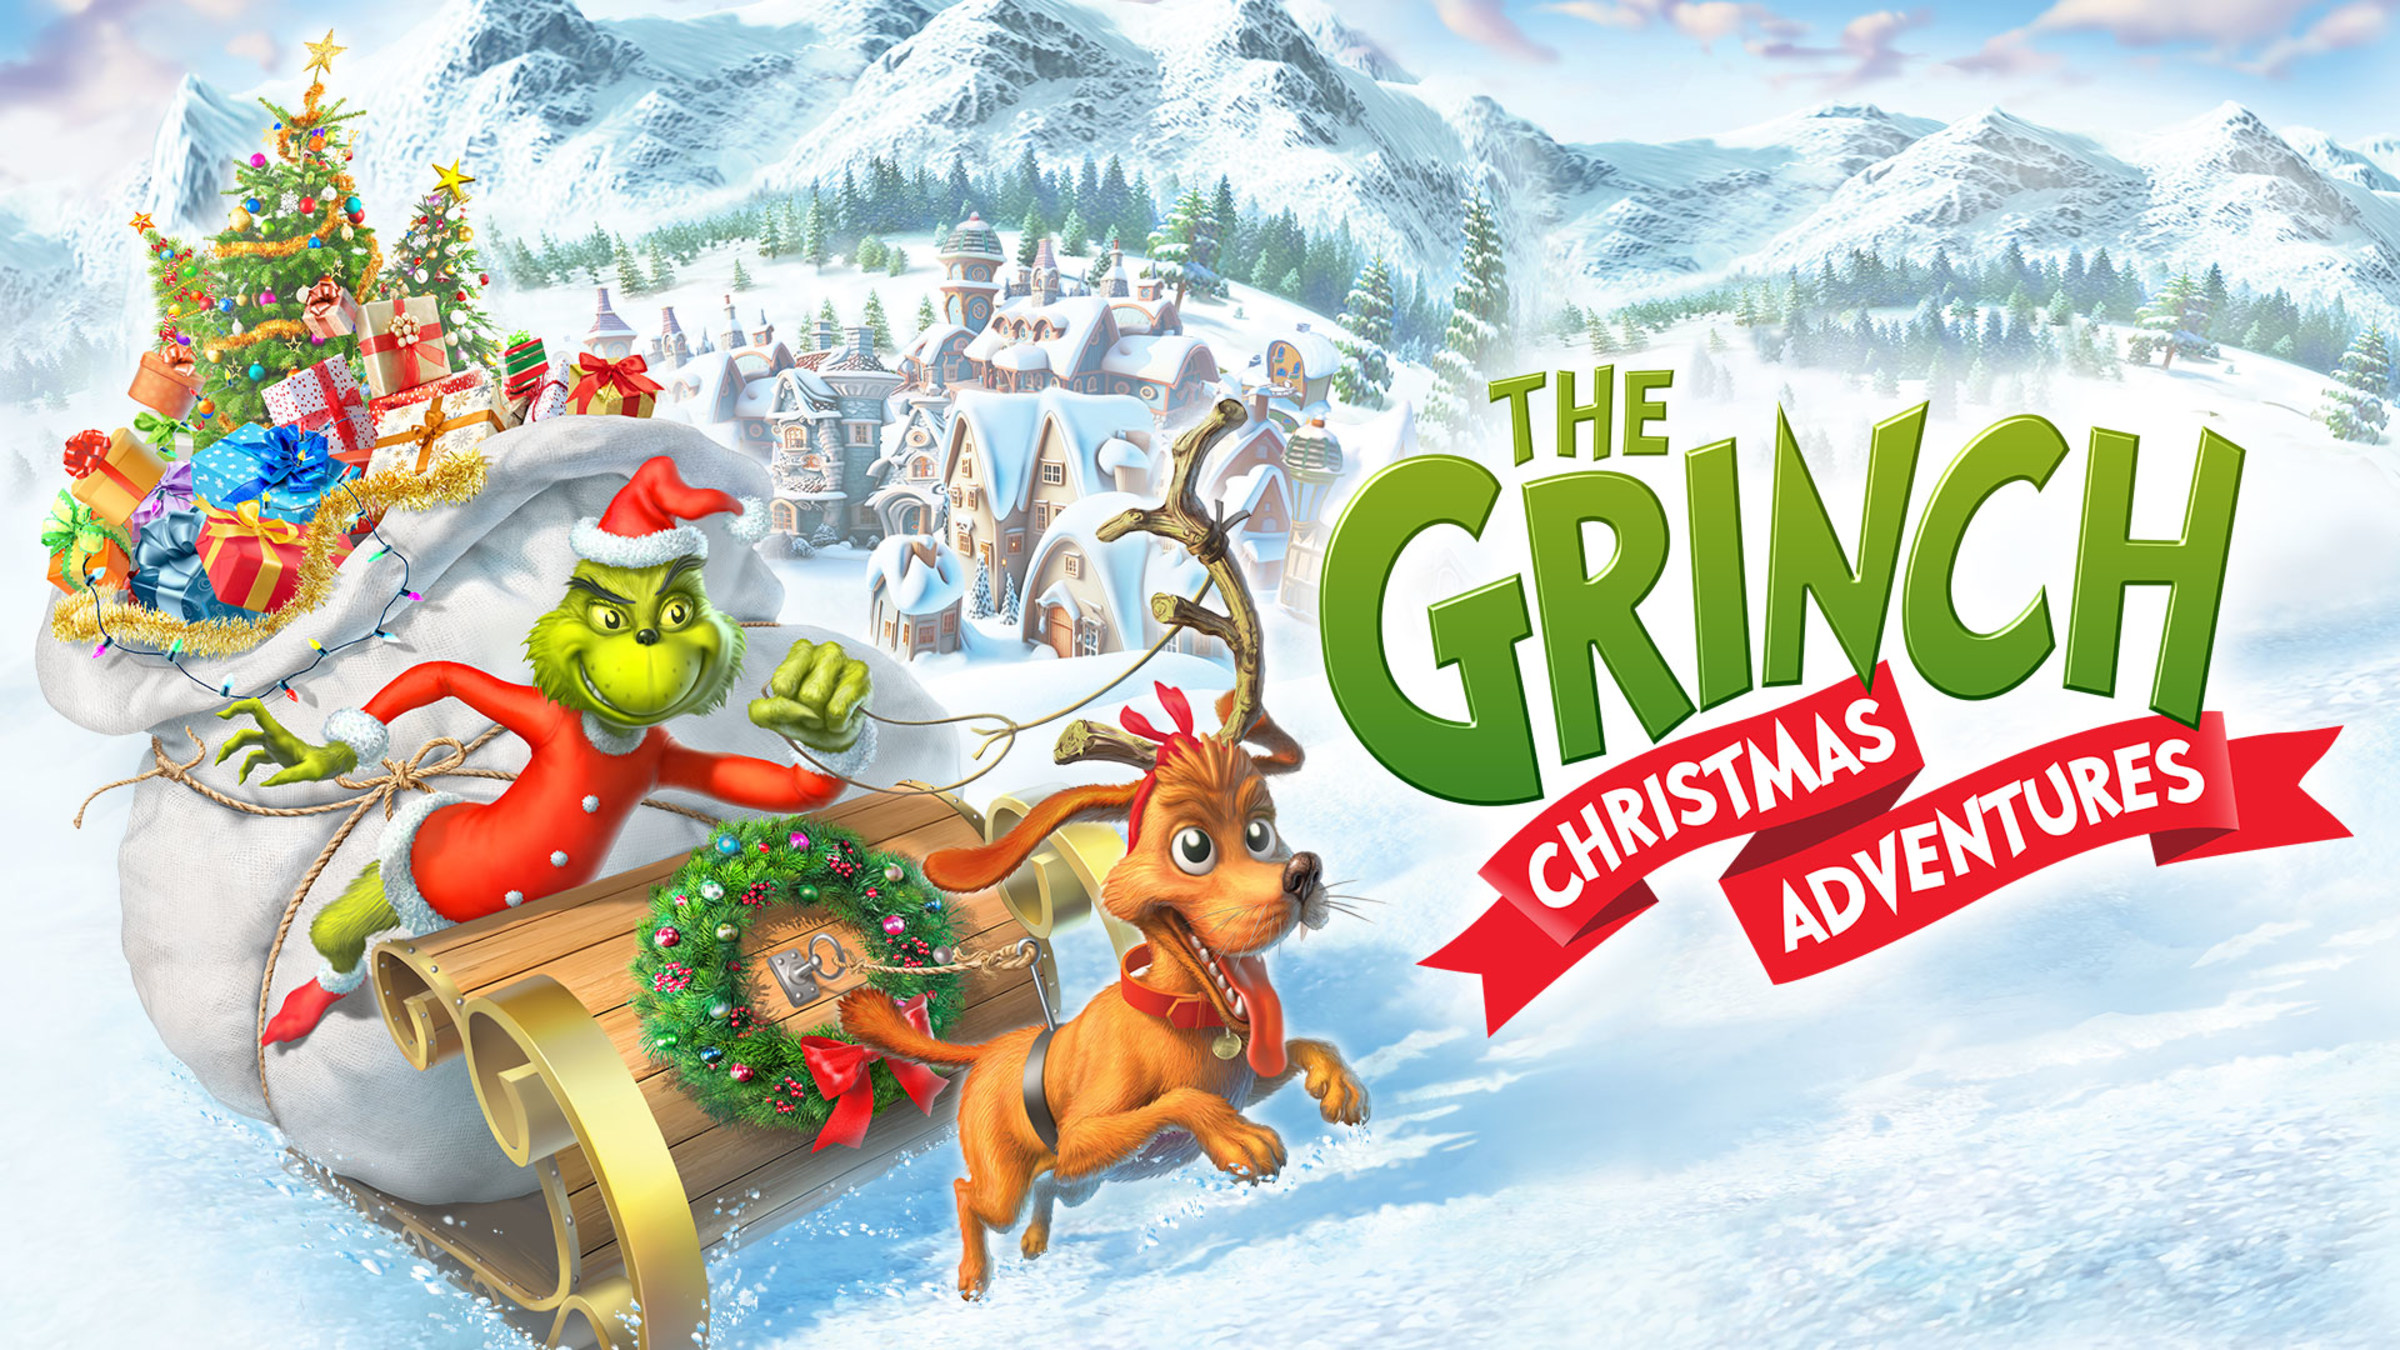 THE GRINCH CHRISTMAS ADVENTURES ACTION ADVENTURE - NINTENDO SWITCH